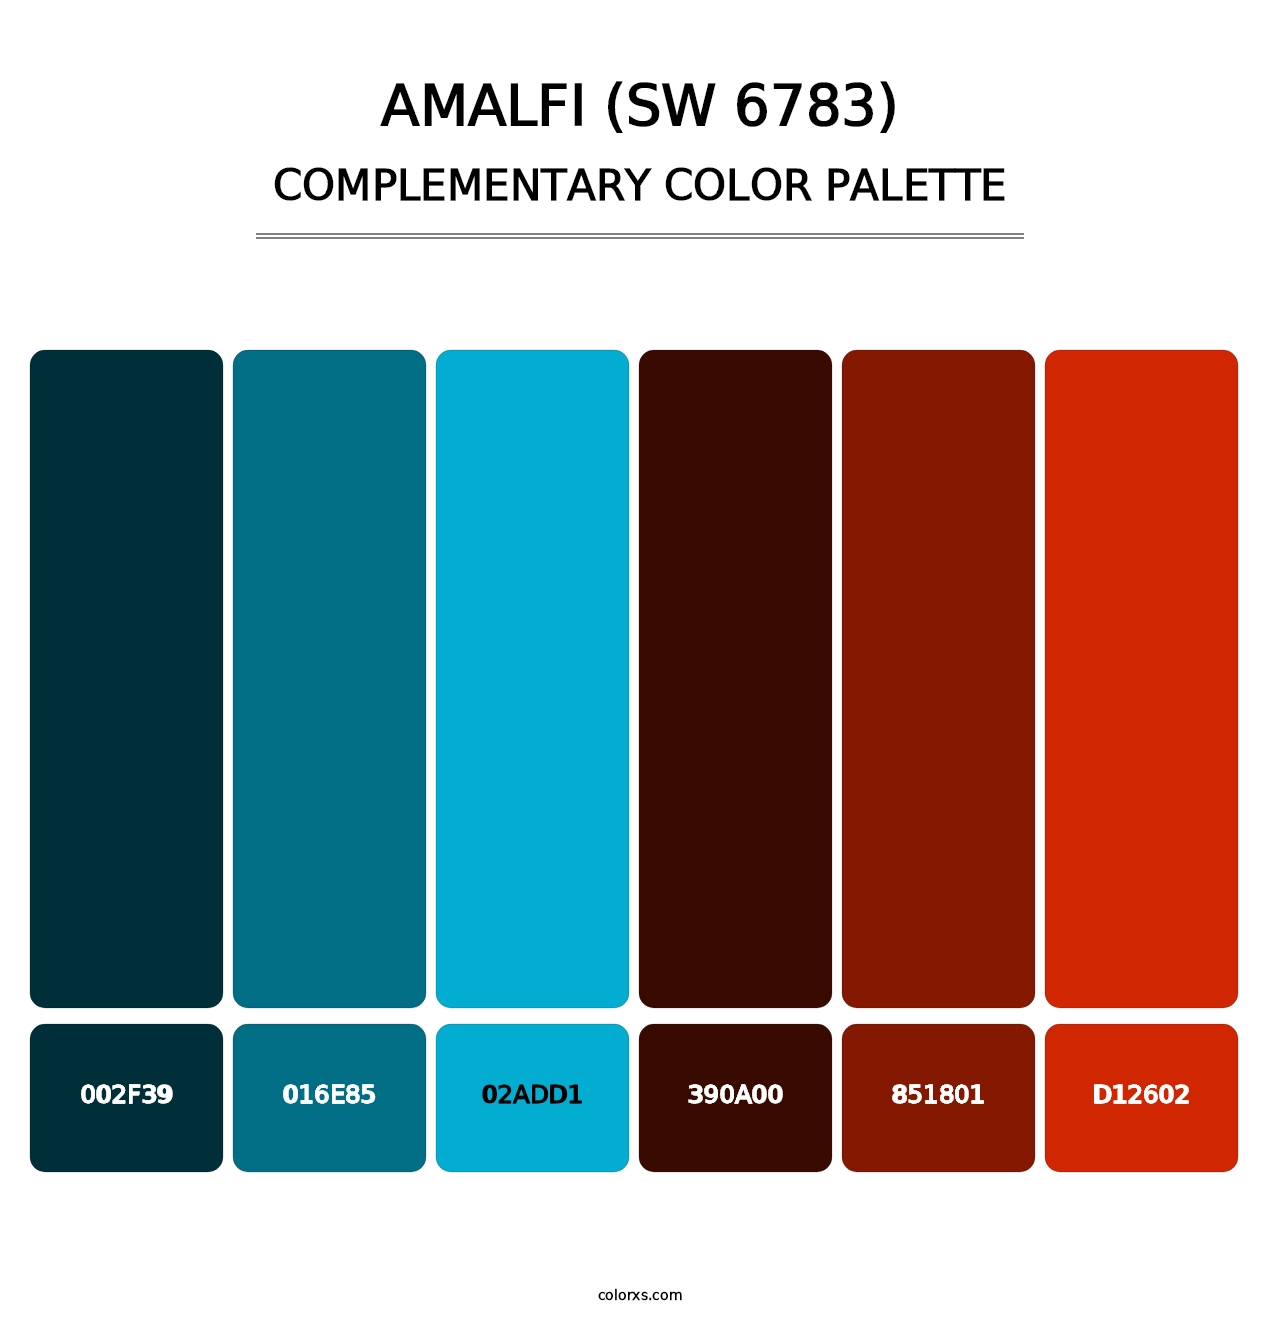 Amalfi (SW 6783) - Complementary Color Palette